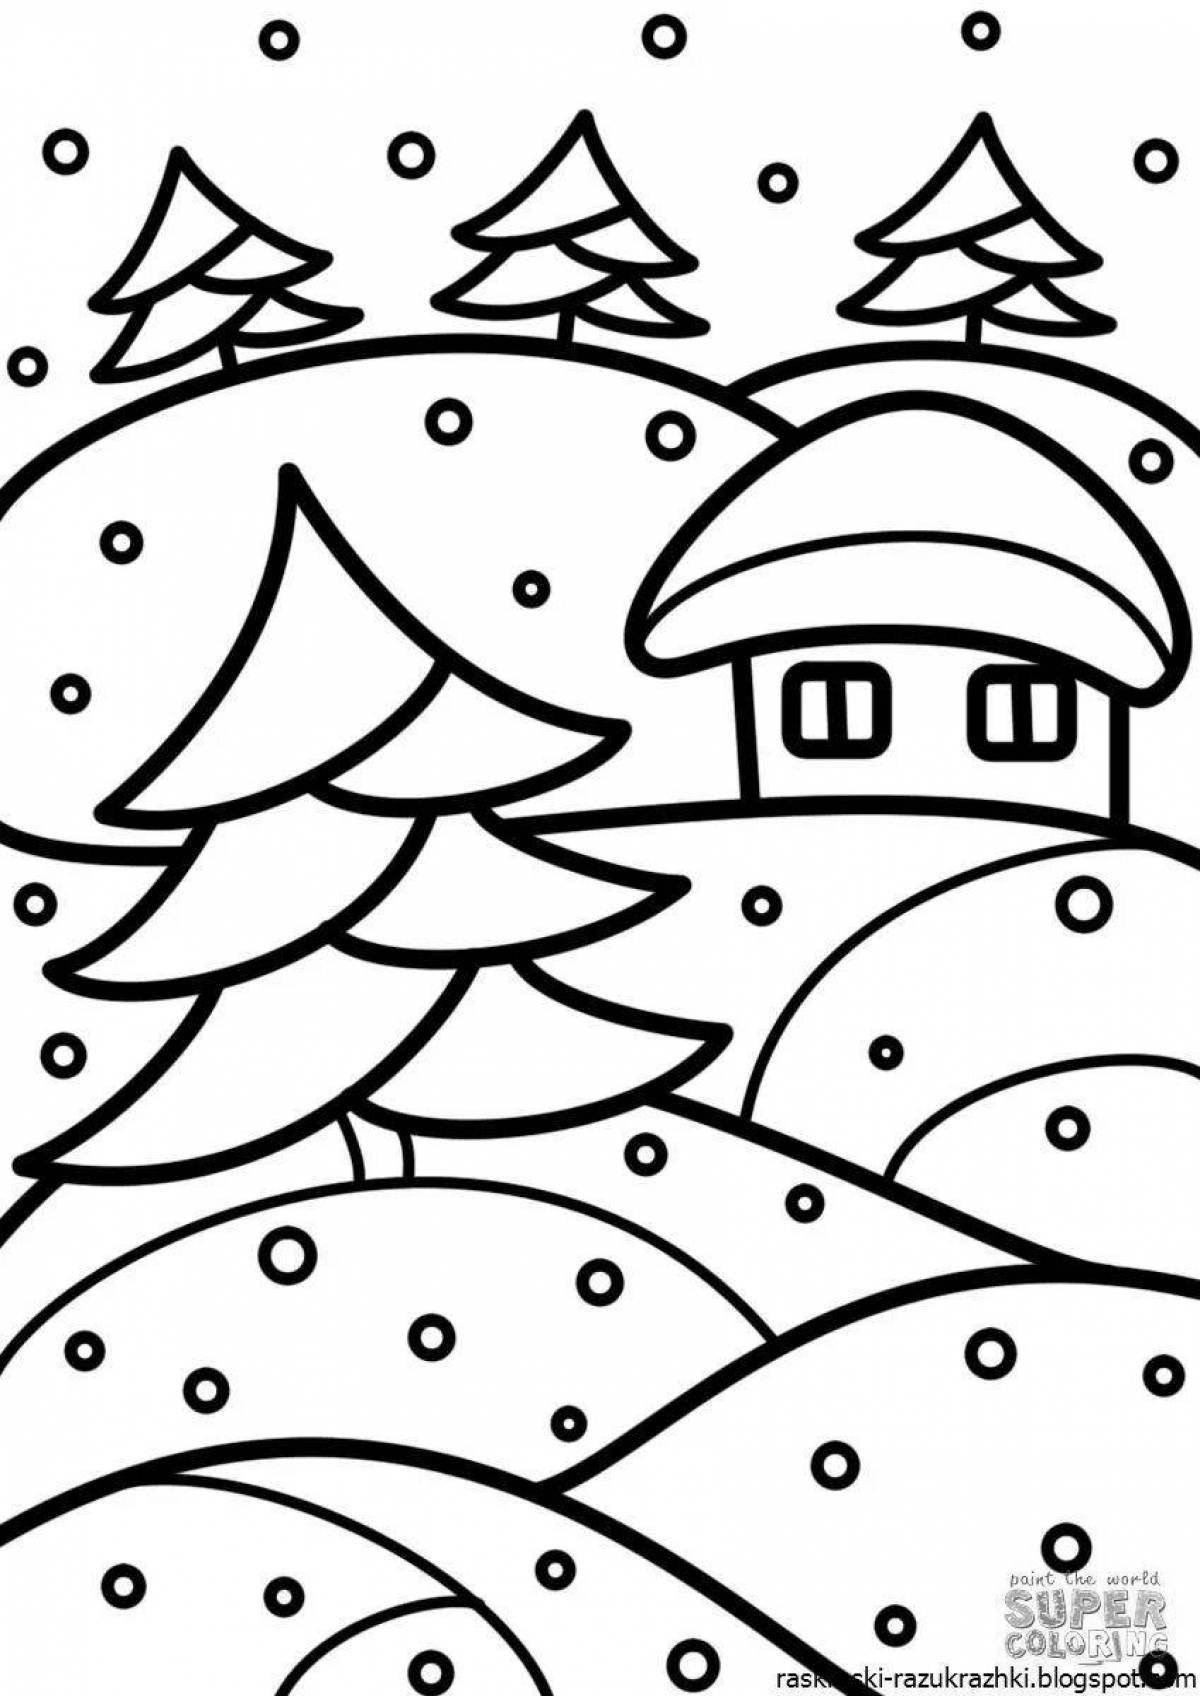 Wonderful winter coloring book for 2-3 year olds